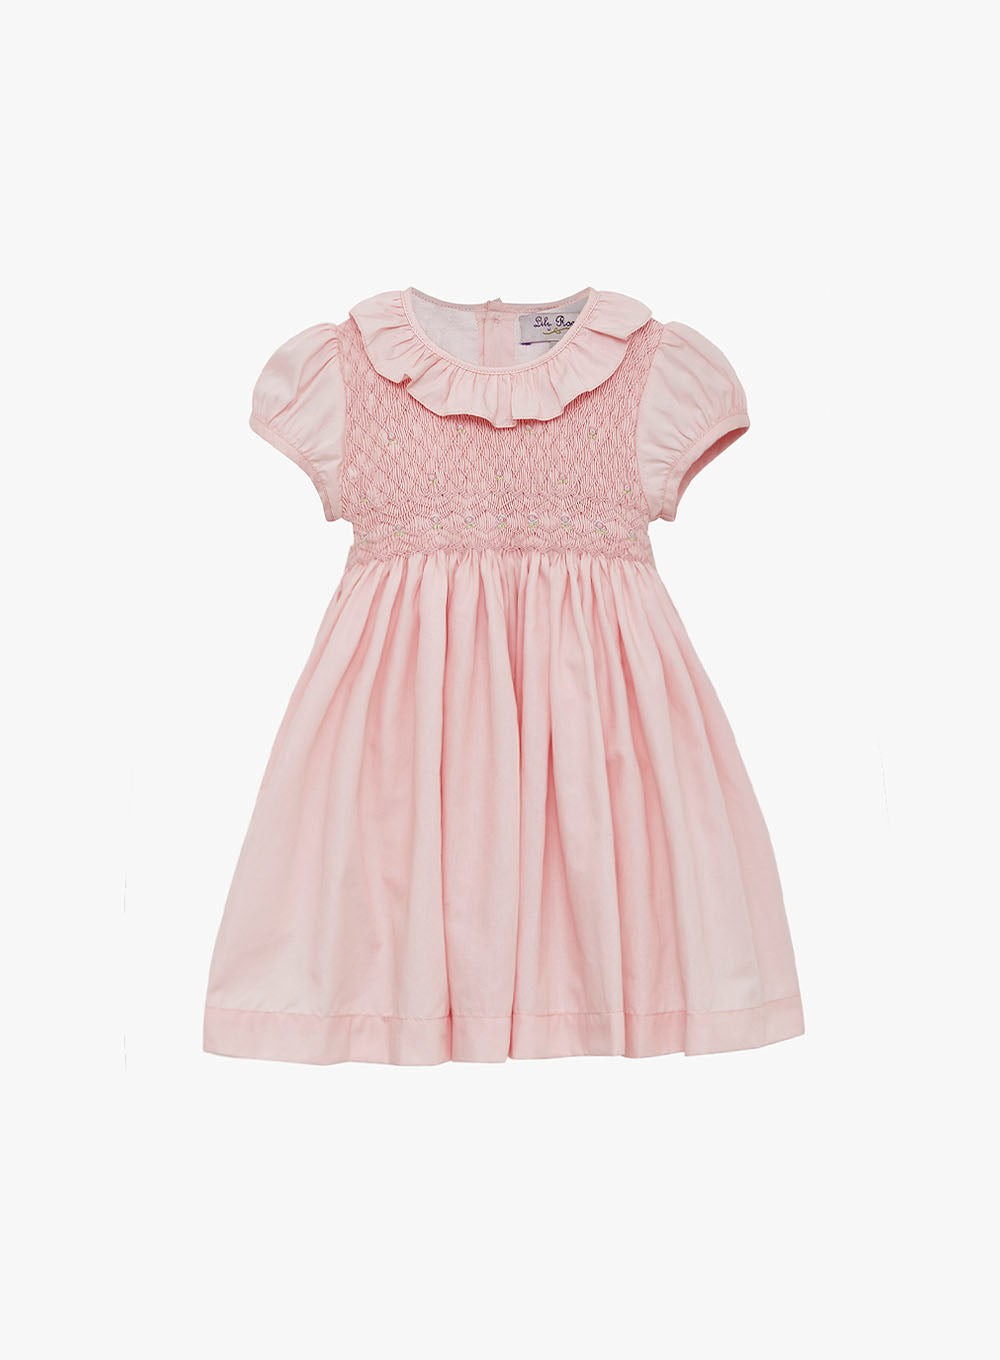 Baby Girls Hand Smocked Dress with Collar in Pink | Trotters